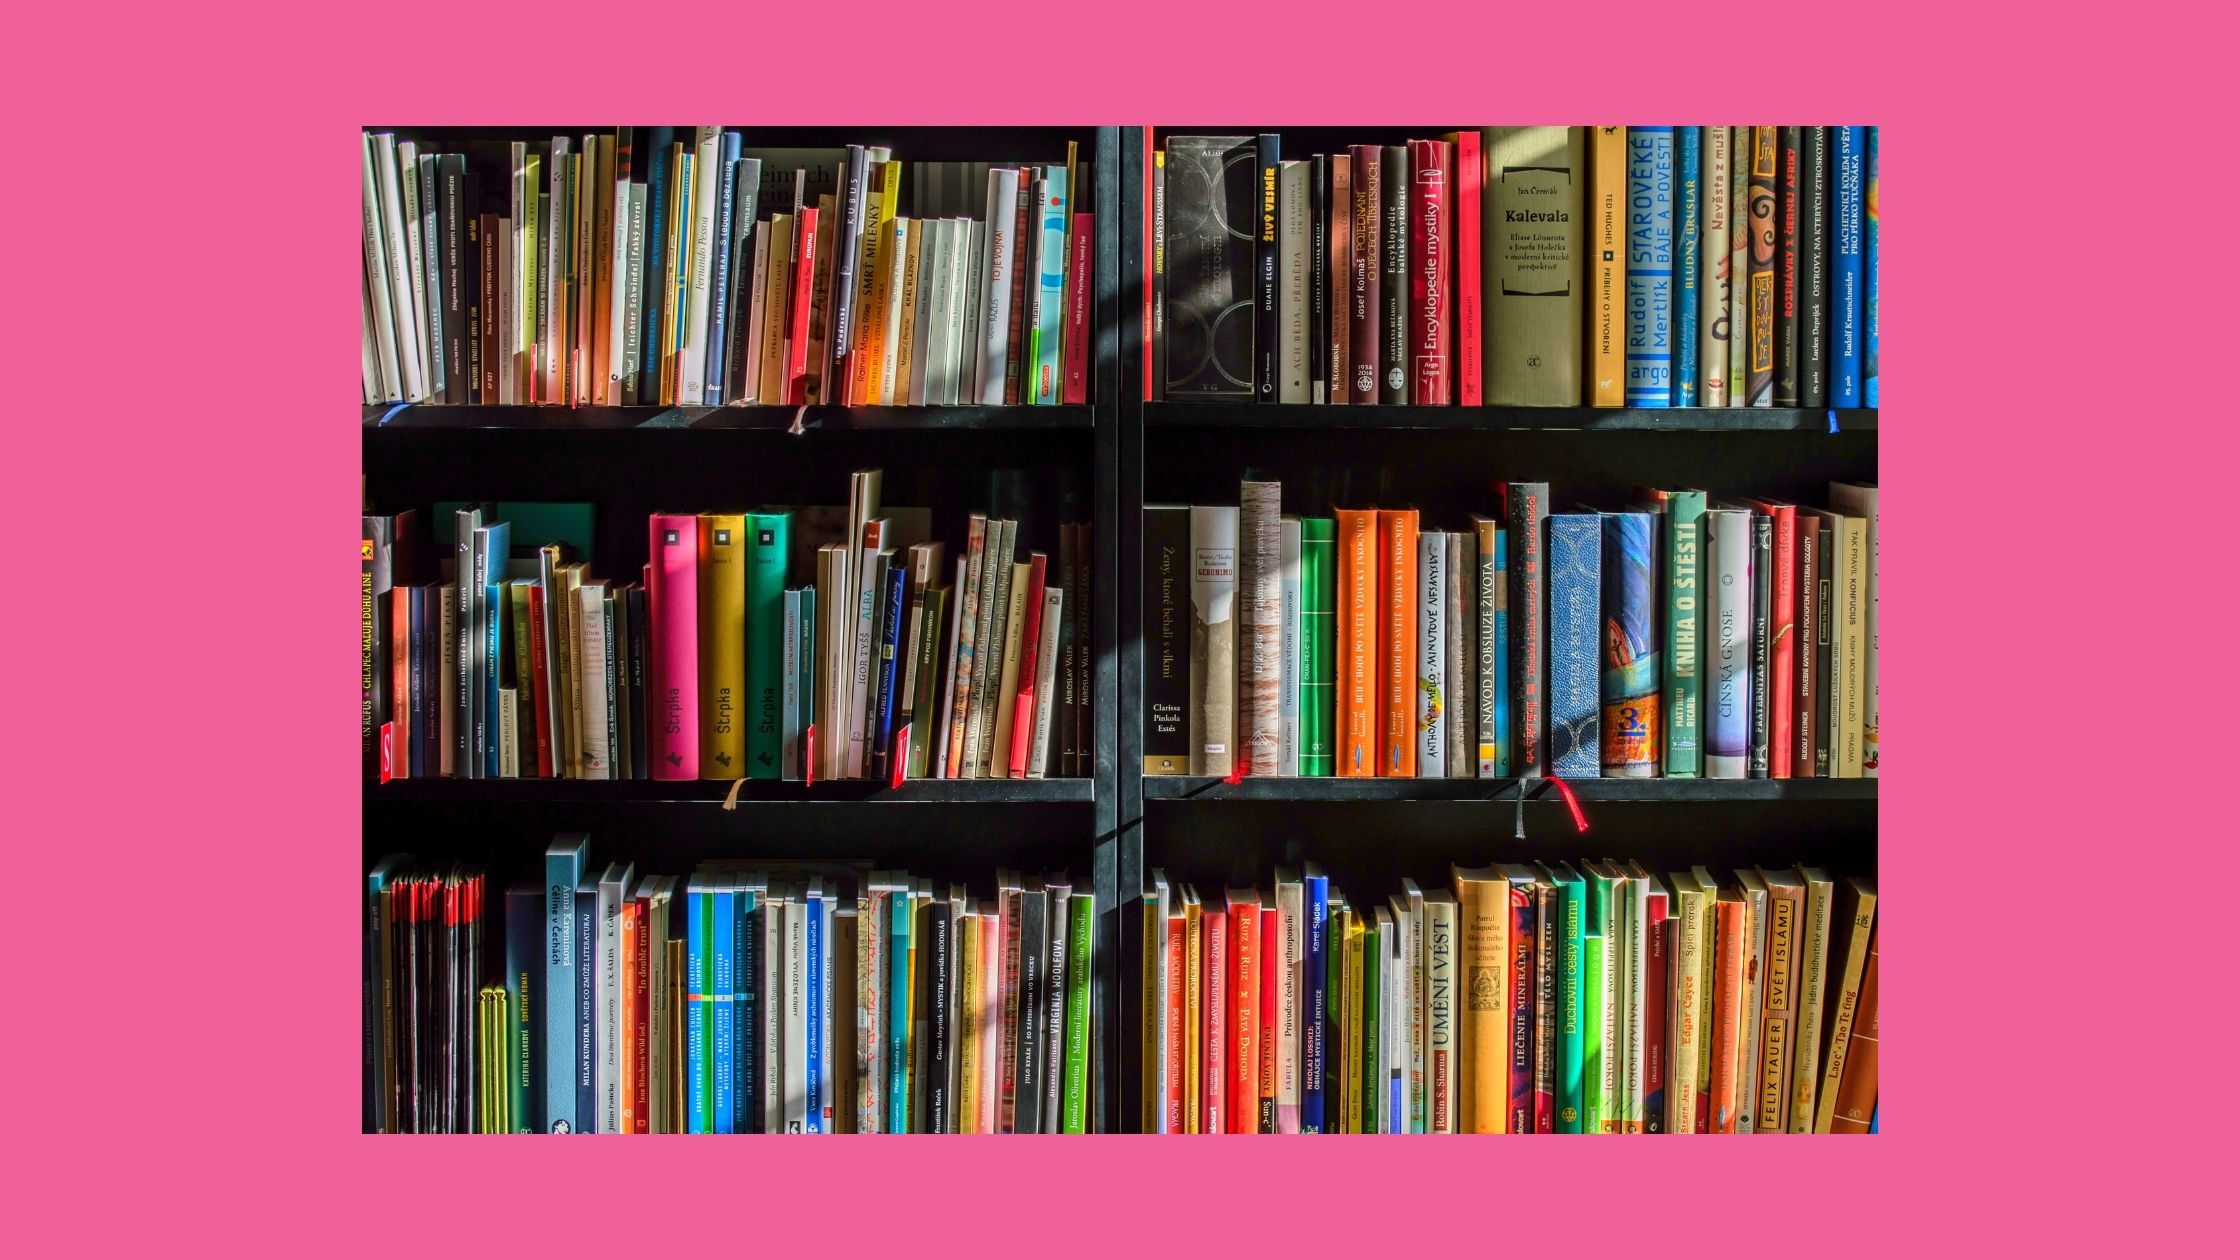 photo of books on a shelf on a pink background